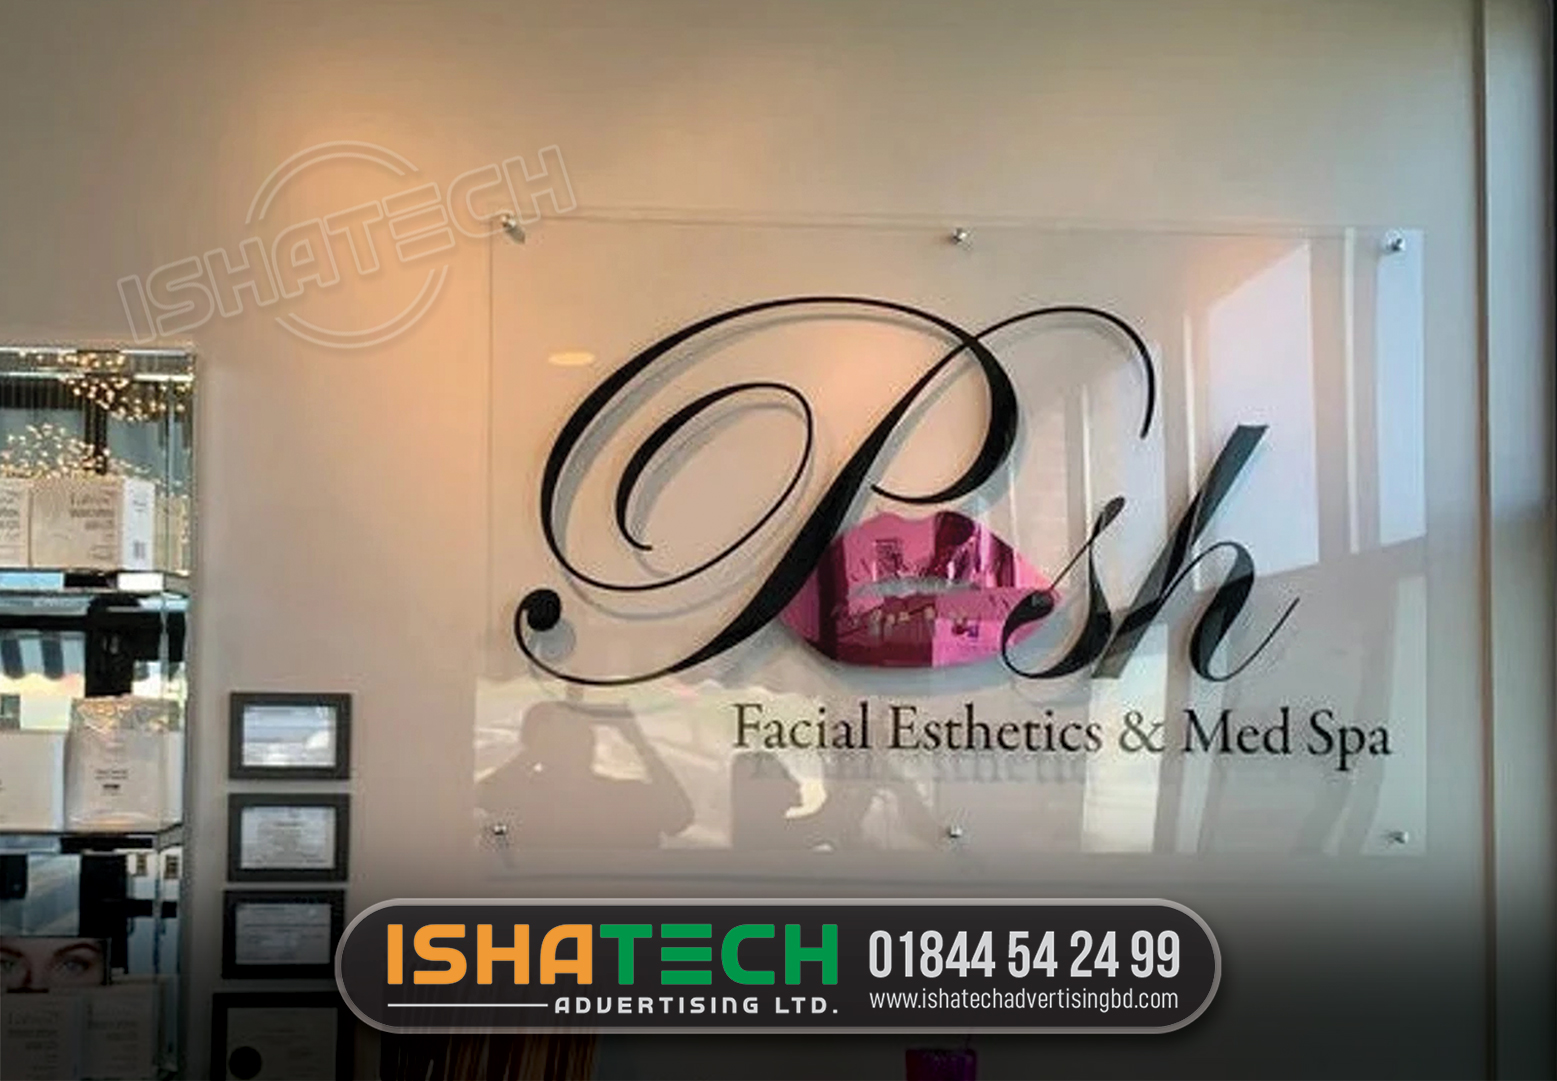 FACIAL ESTHERICS AND MED SPA OFFICE NAME PLATE, GLASS NAME PLATE, WALL NAME PLATE SIGNS